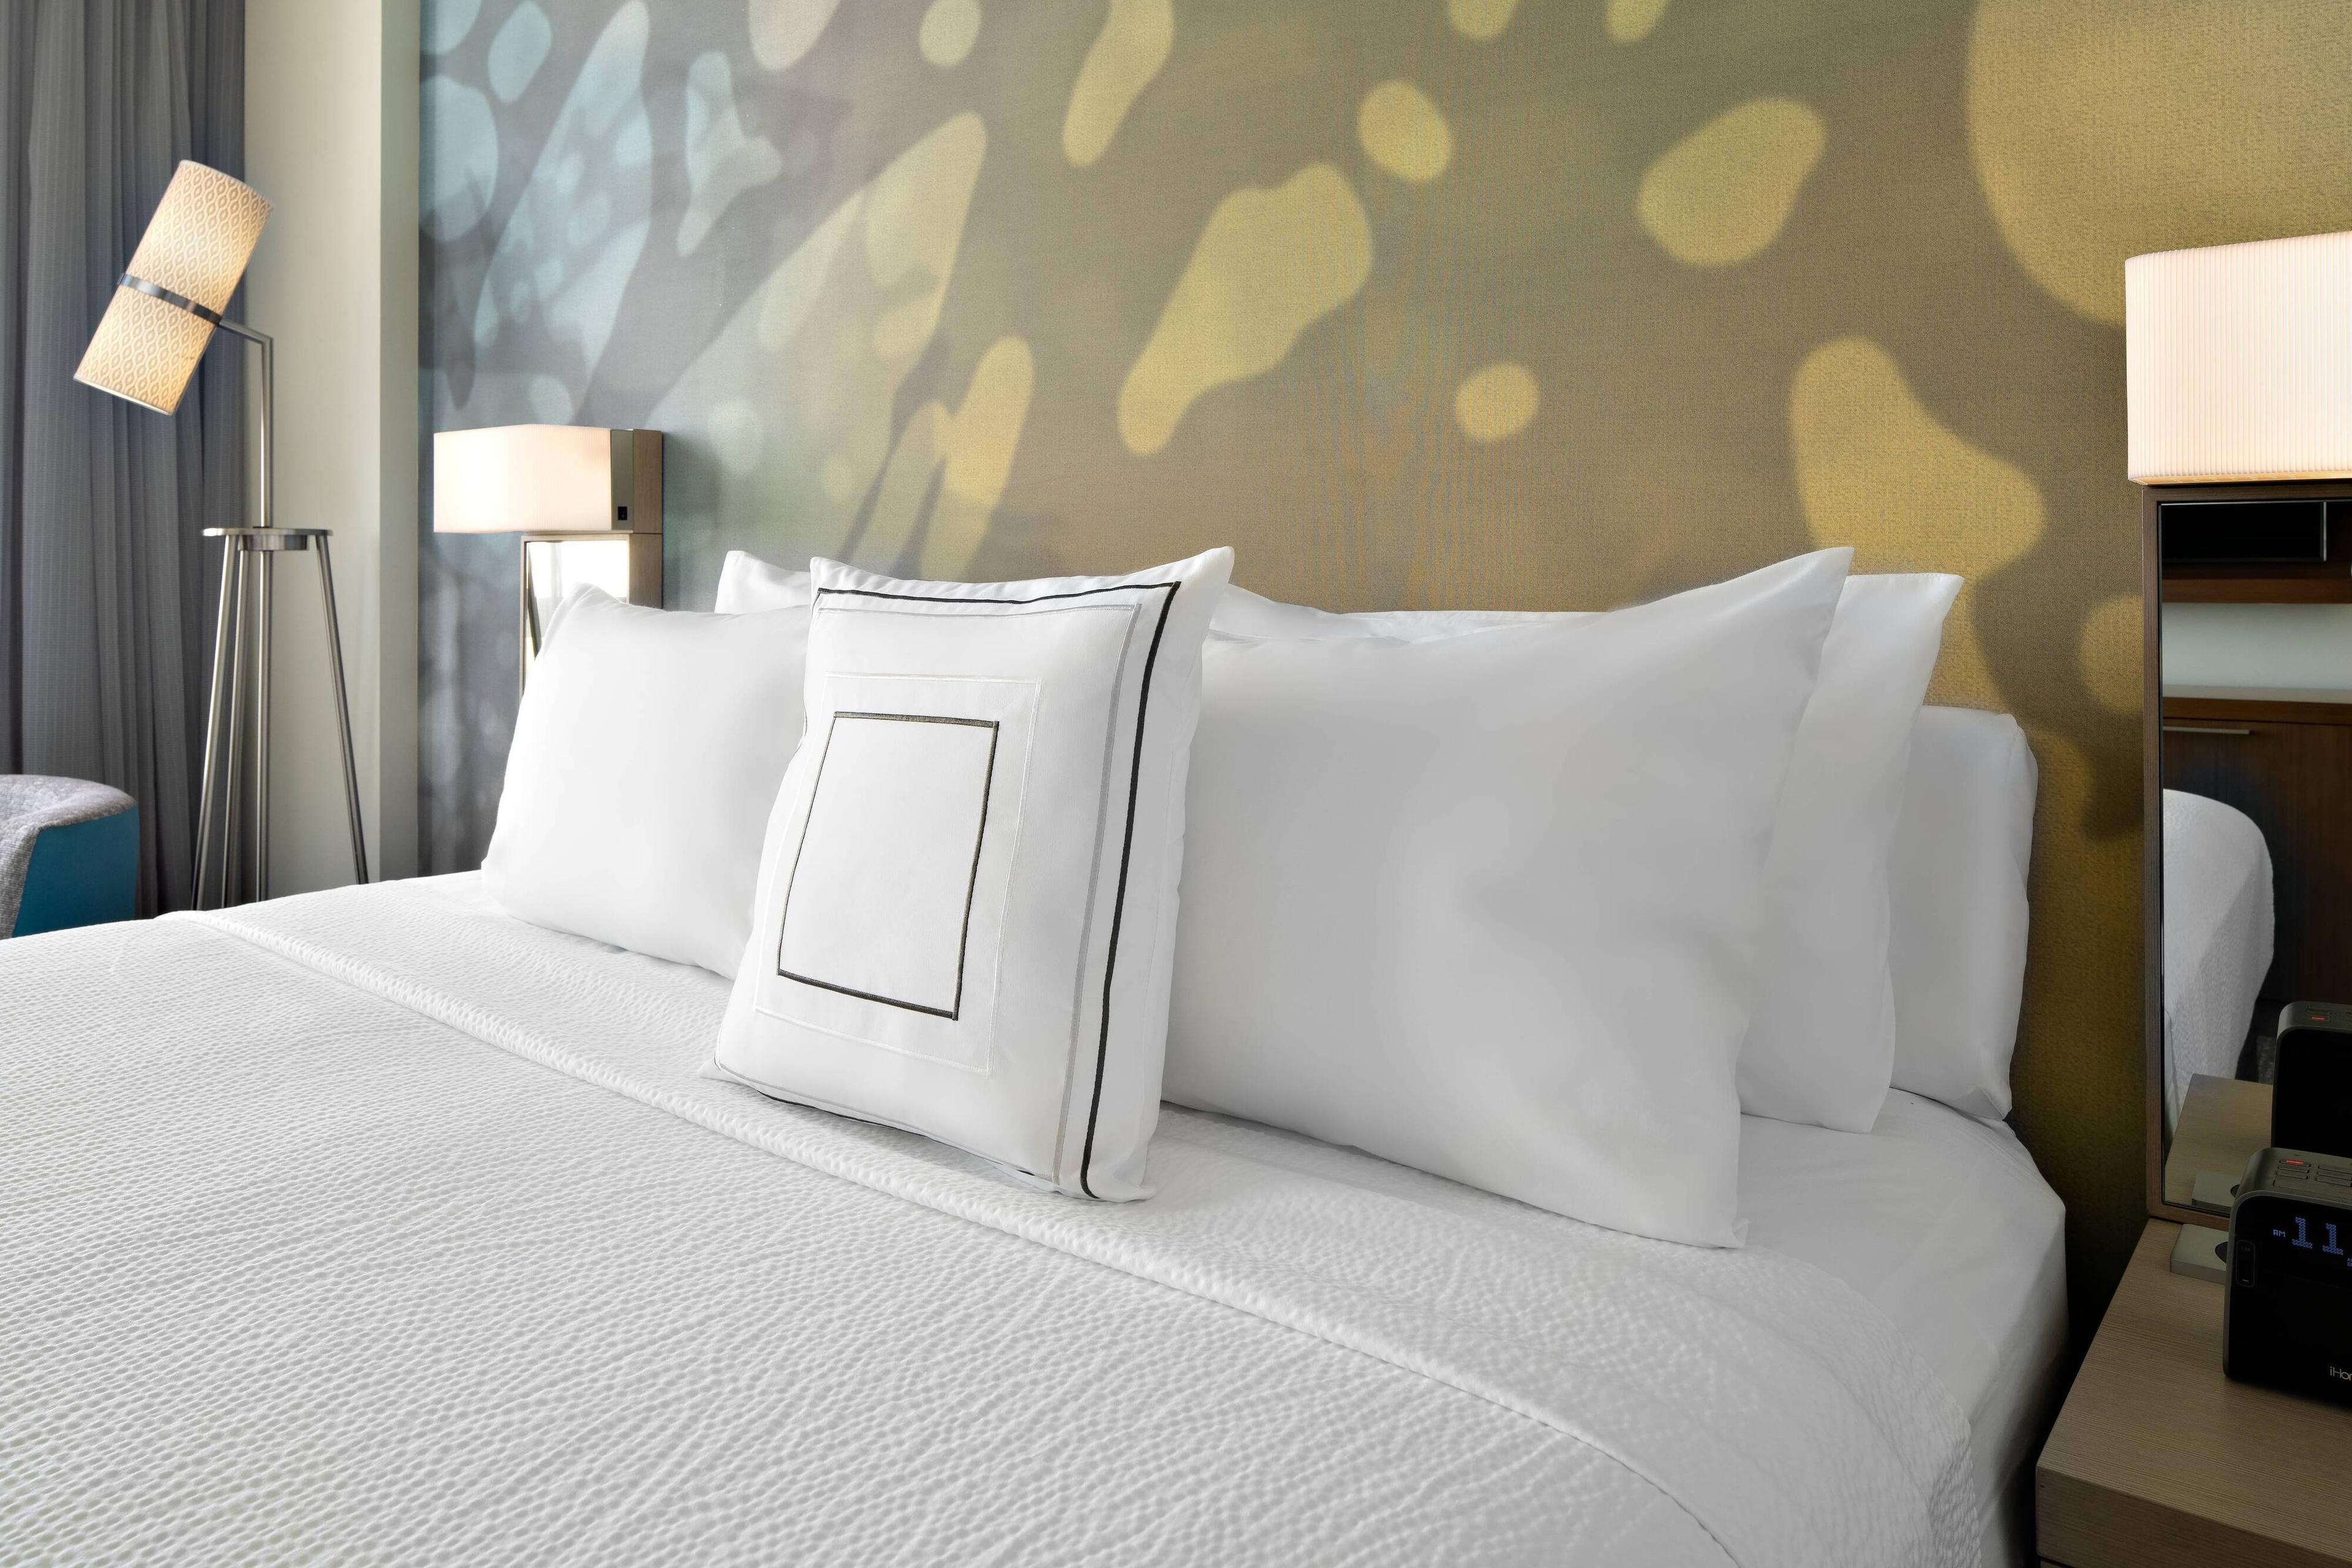 Our king rooms offer a comfortable bed topped with luxurious linens and plenty of fluffy pillows.